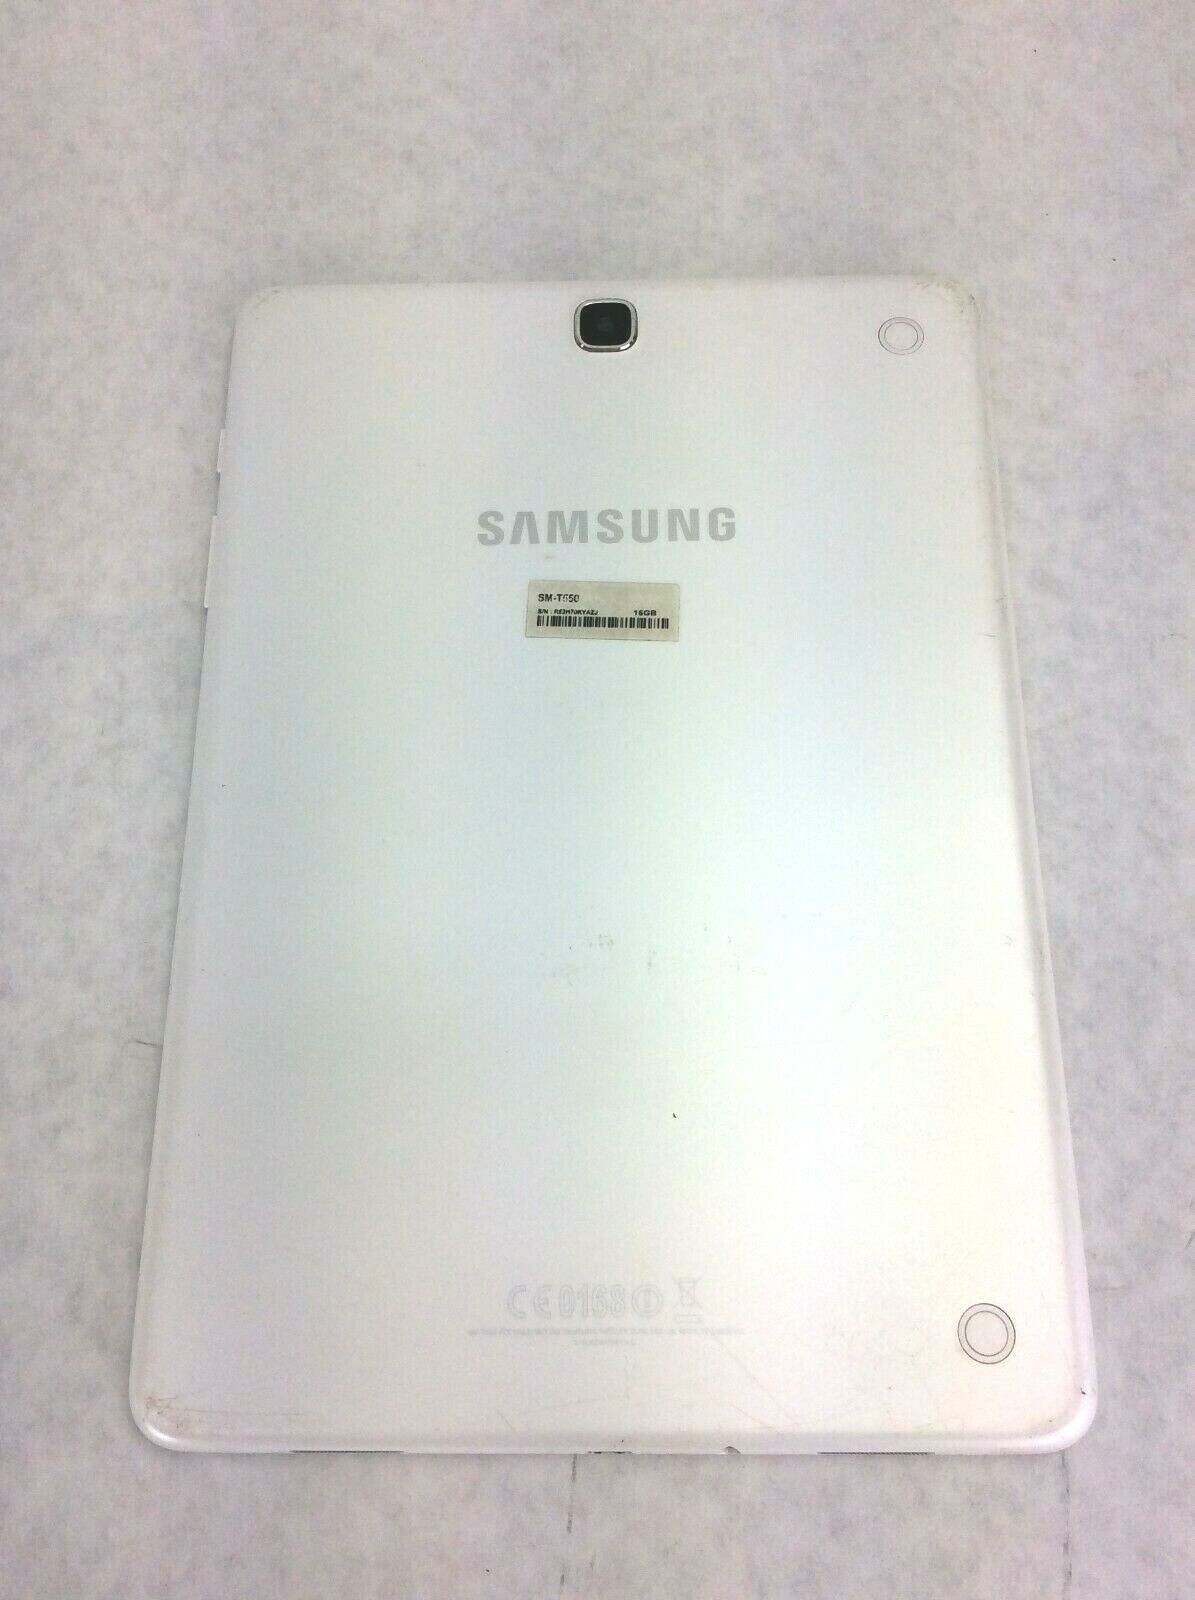 Samsung Galaxy Tab A 16GB Wi-Fi 9.7in White Tablet SM-P550 - Cracked Screen